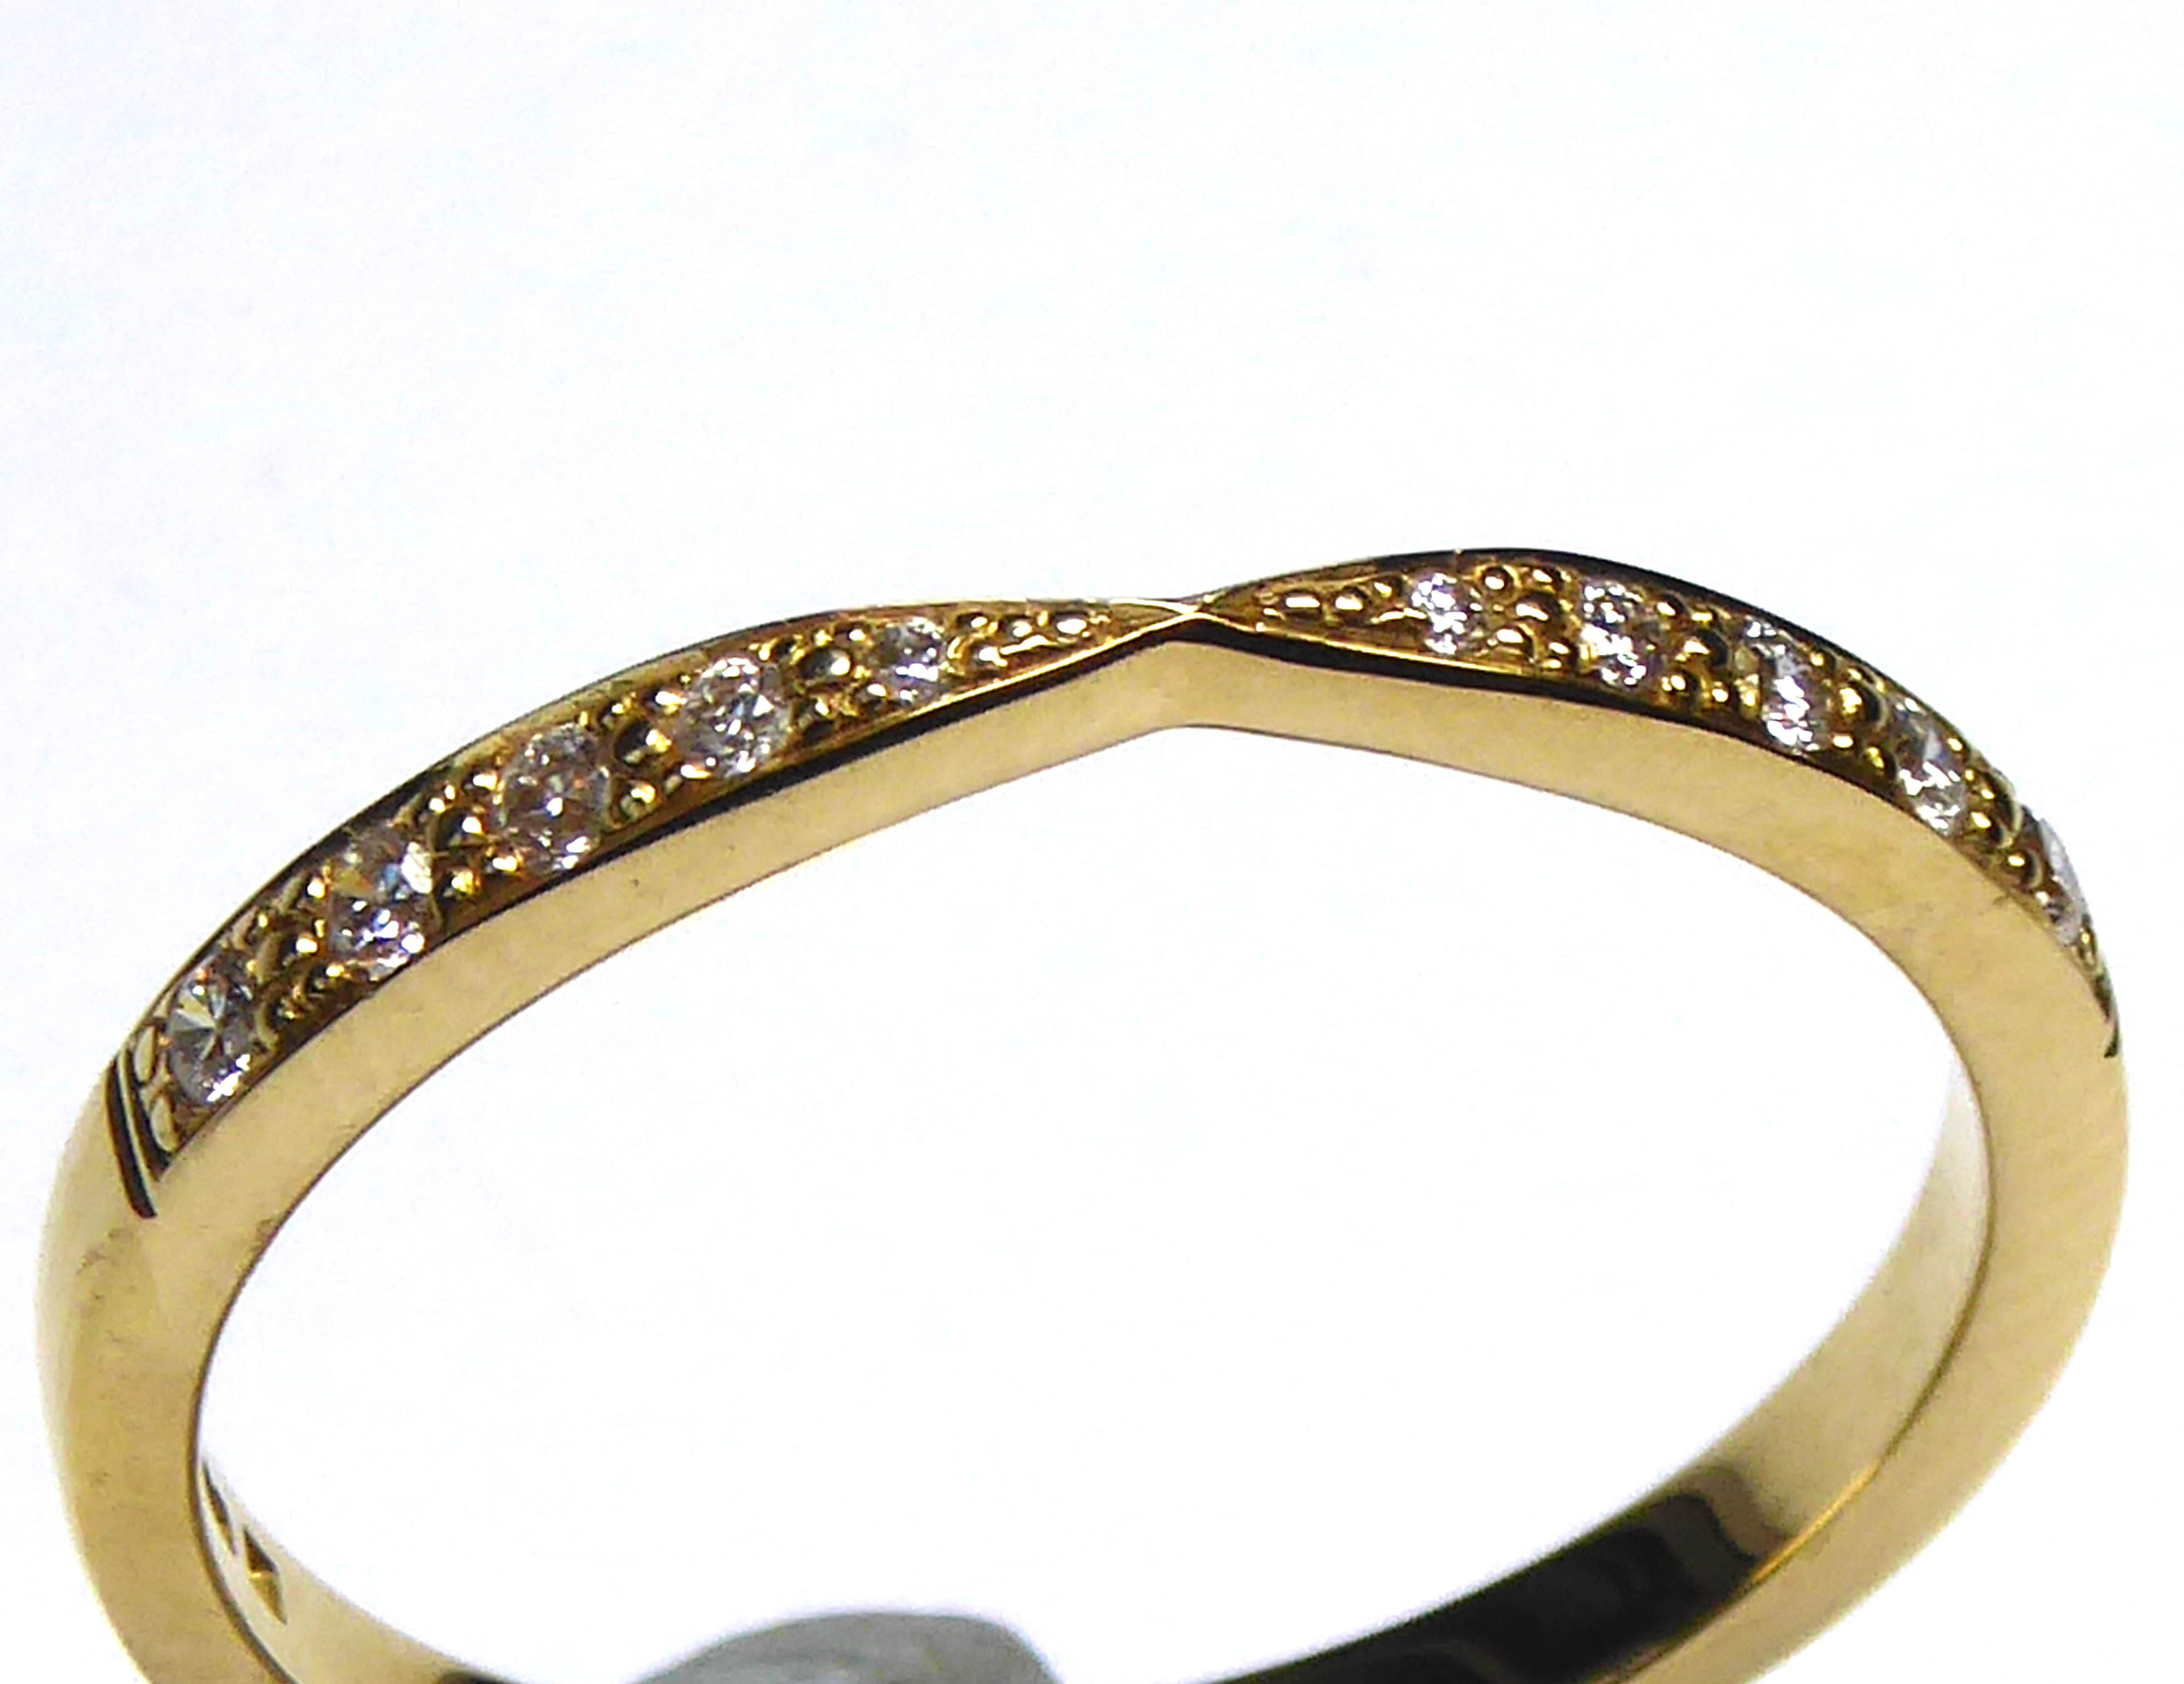 AN 18CT GOLD AND DIAMOND WEDDING BAND Having two rows of round cut diamonds (size M/N).